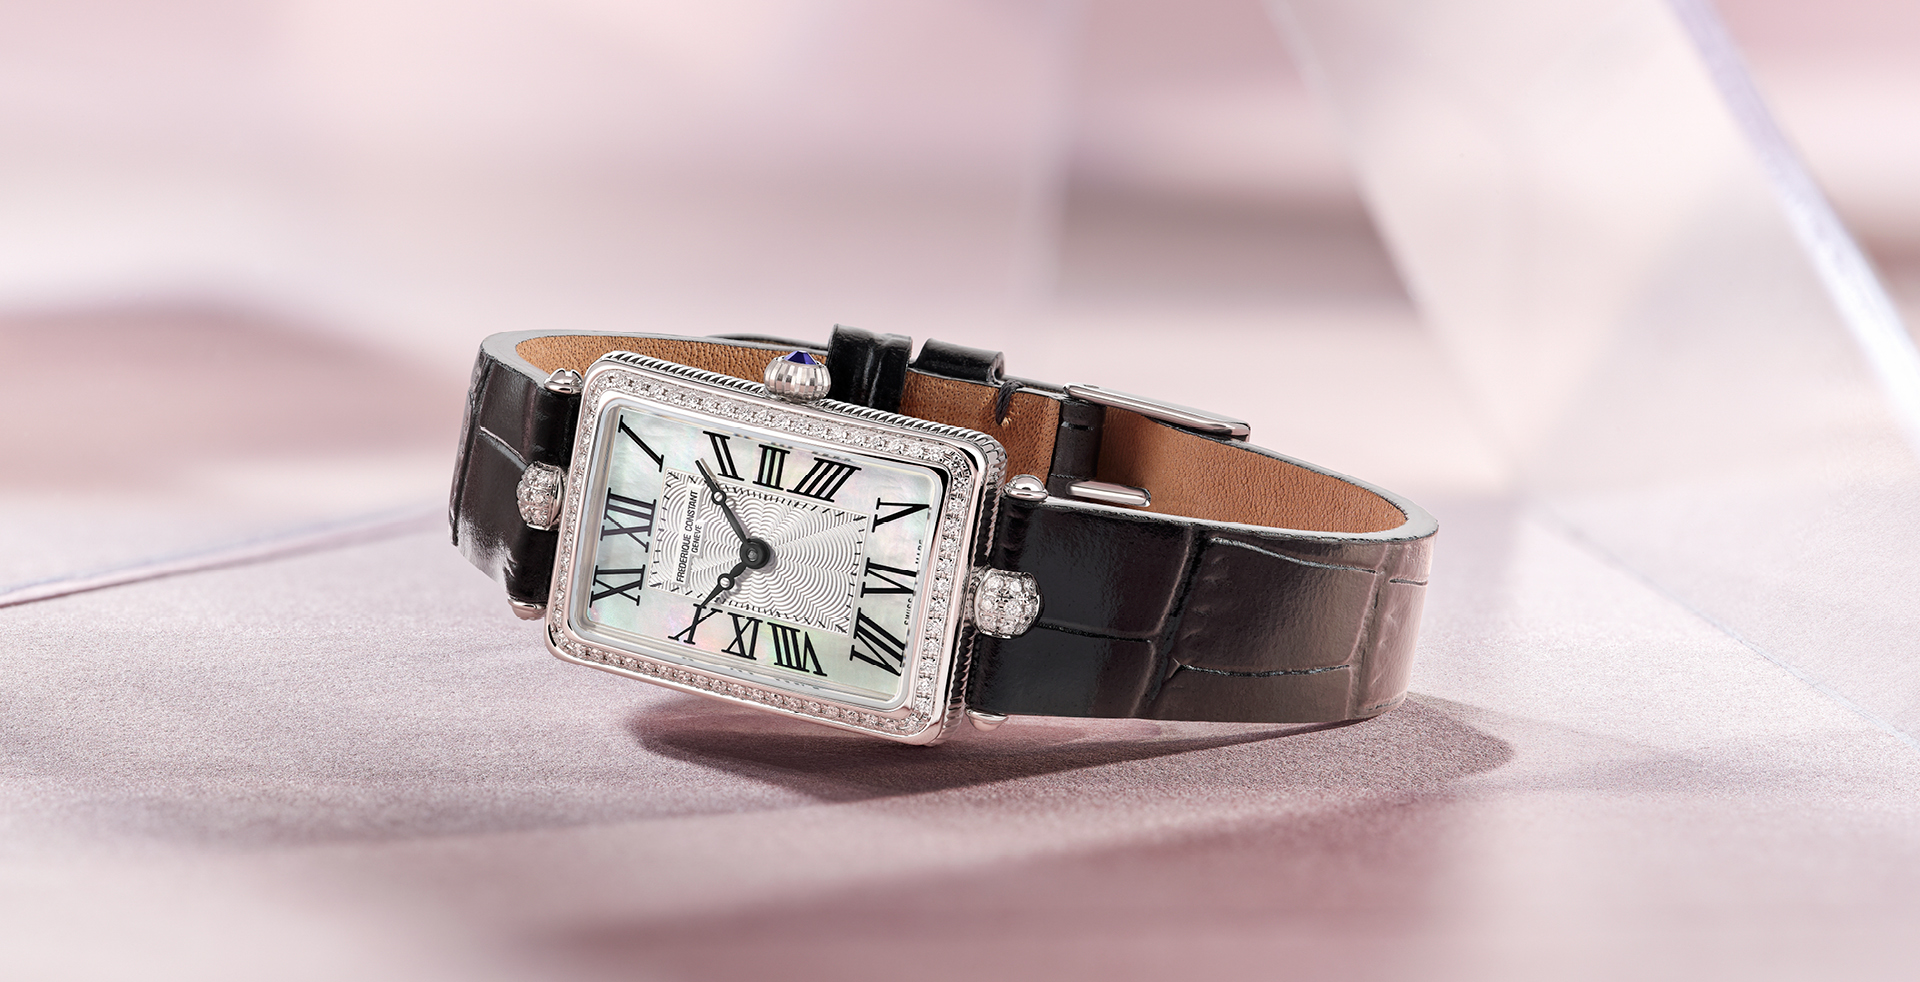 Classics Art Déco Carrée Watch for woman. Quartz movement, white mother of pearl dial, stainless-steel case and black leather strap 